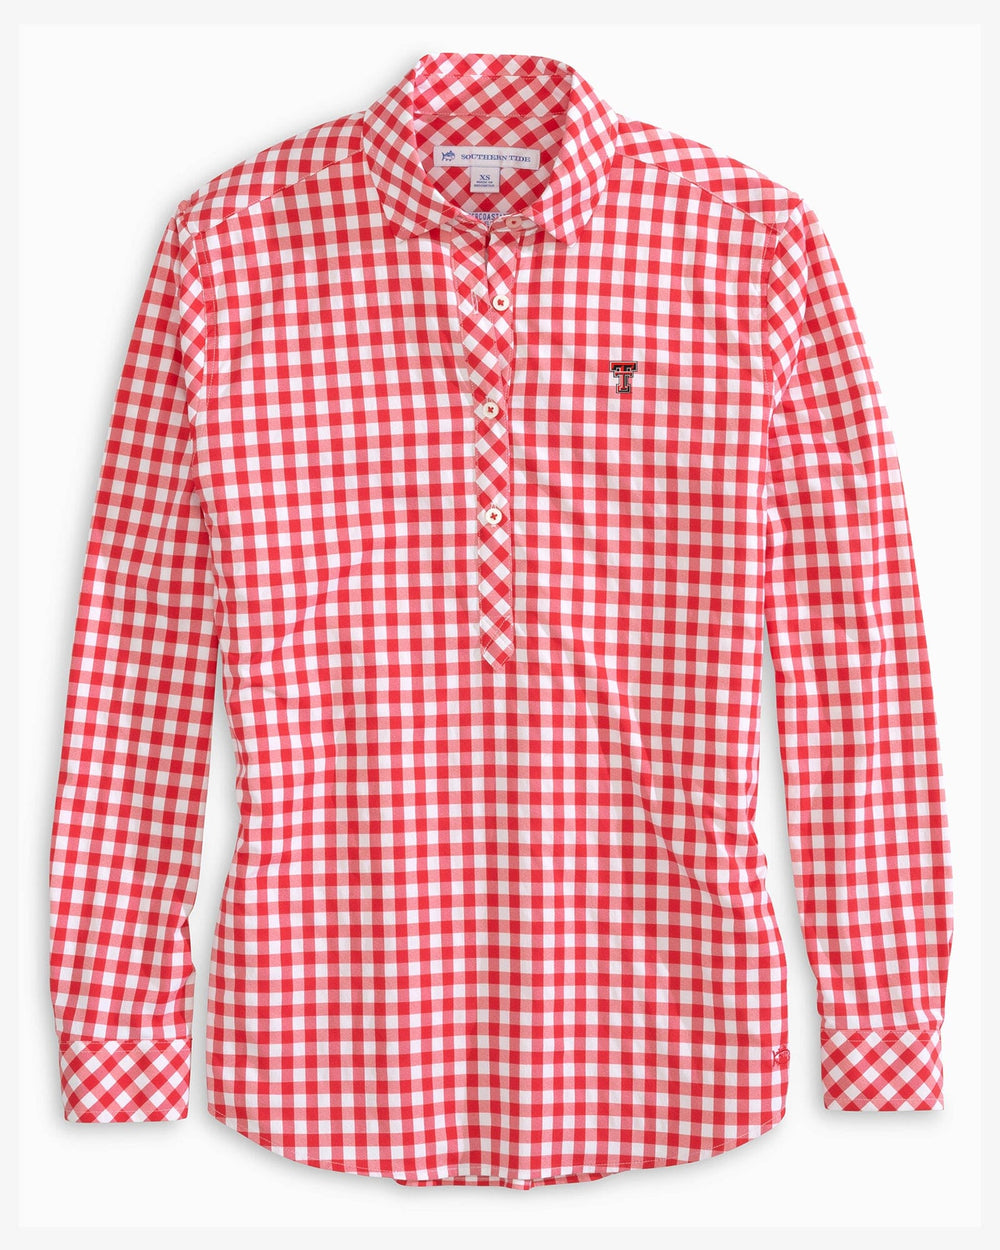 The front view of the Texas Tech Red Raiders Intercoastal Hadley Popover Shirt by Southern Tide - Varsity Red